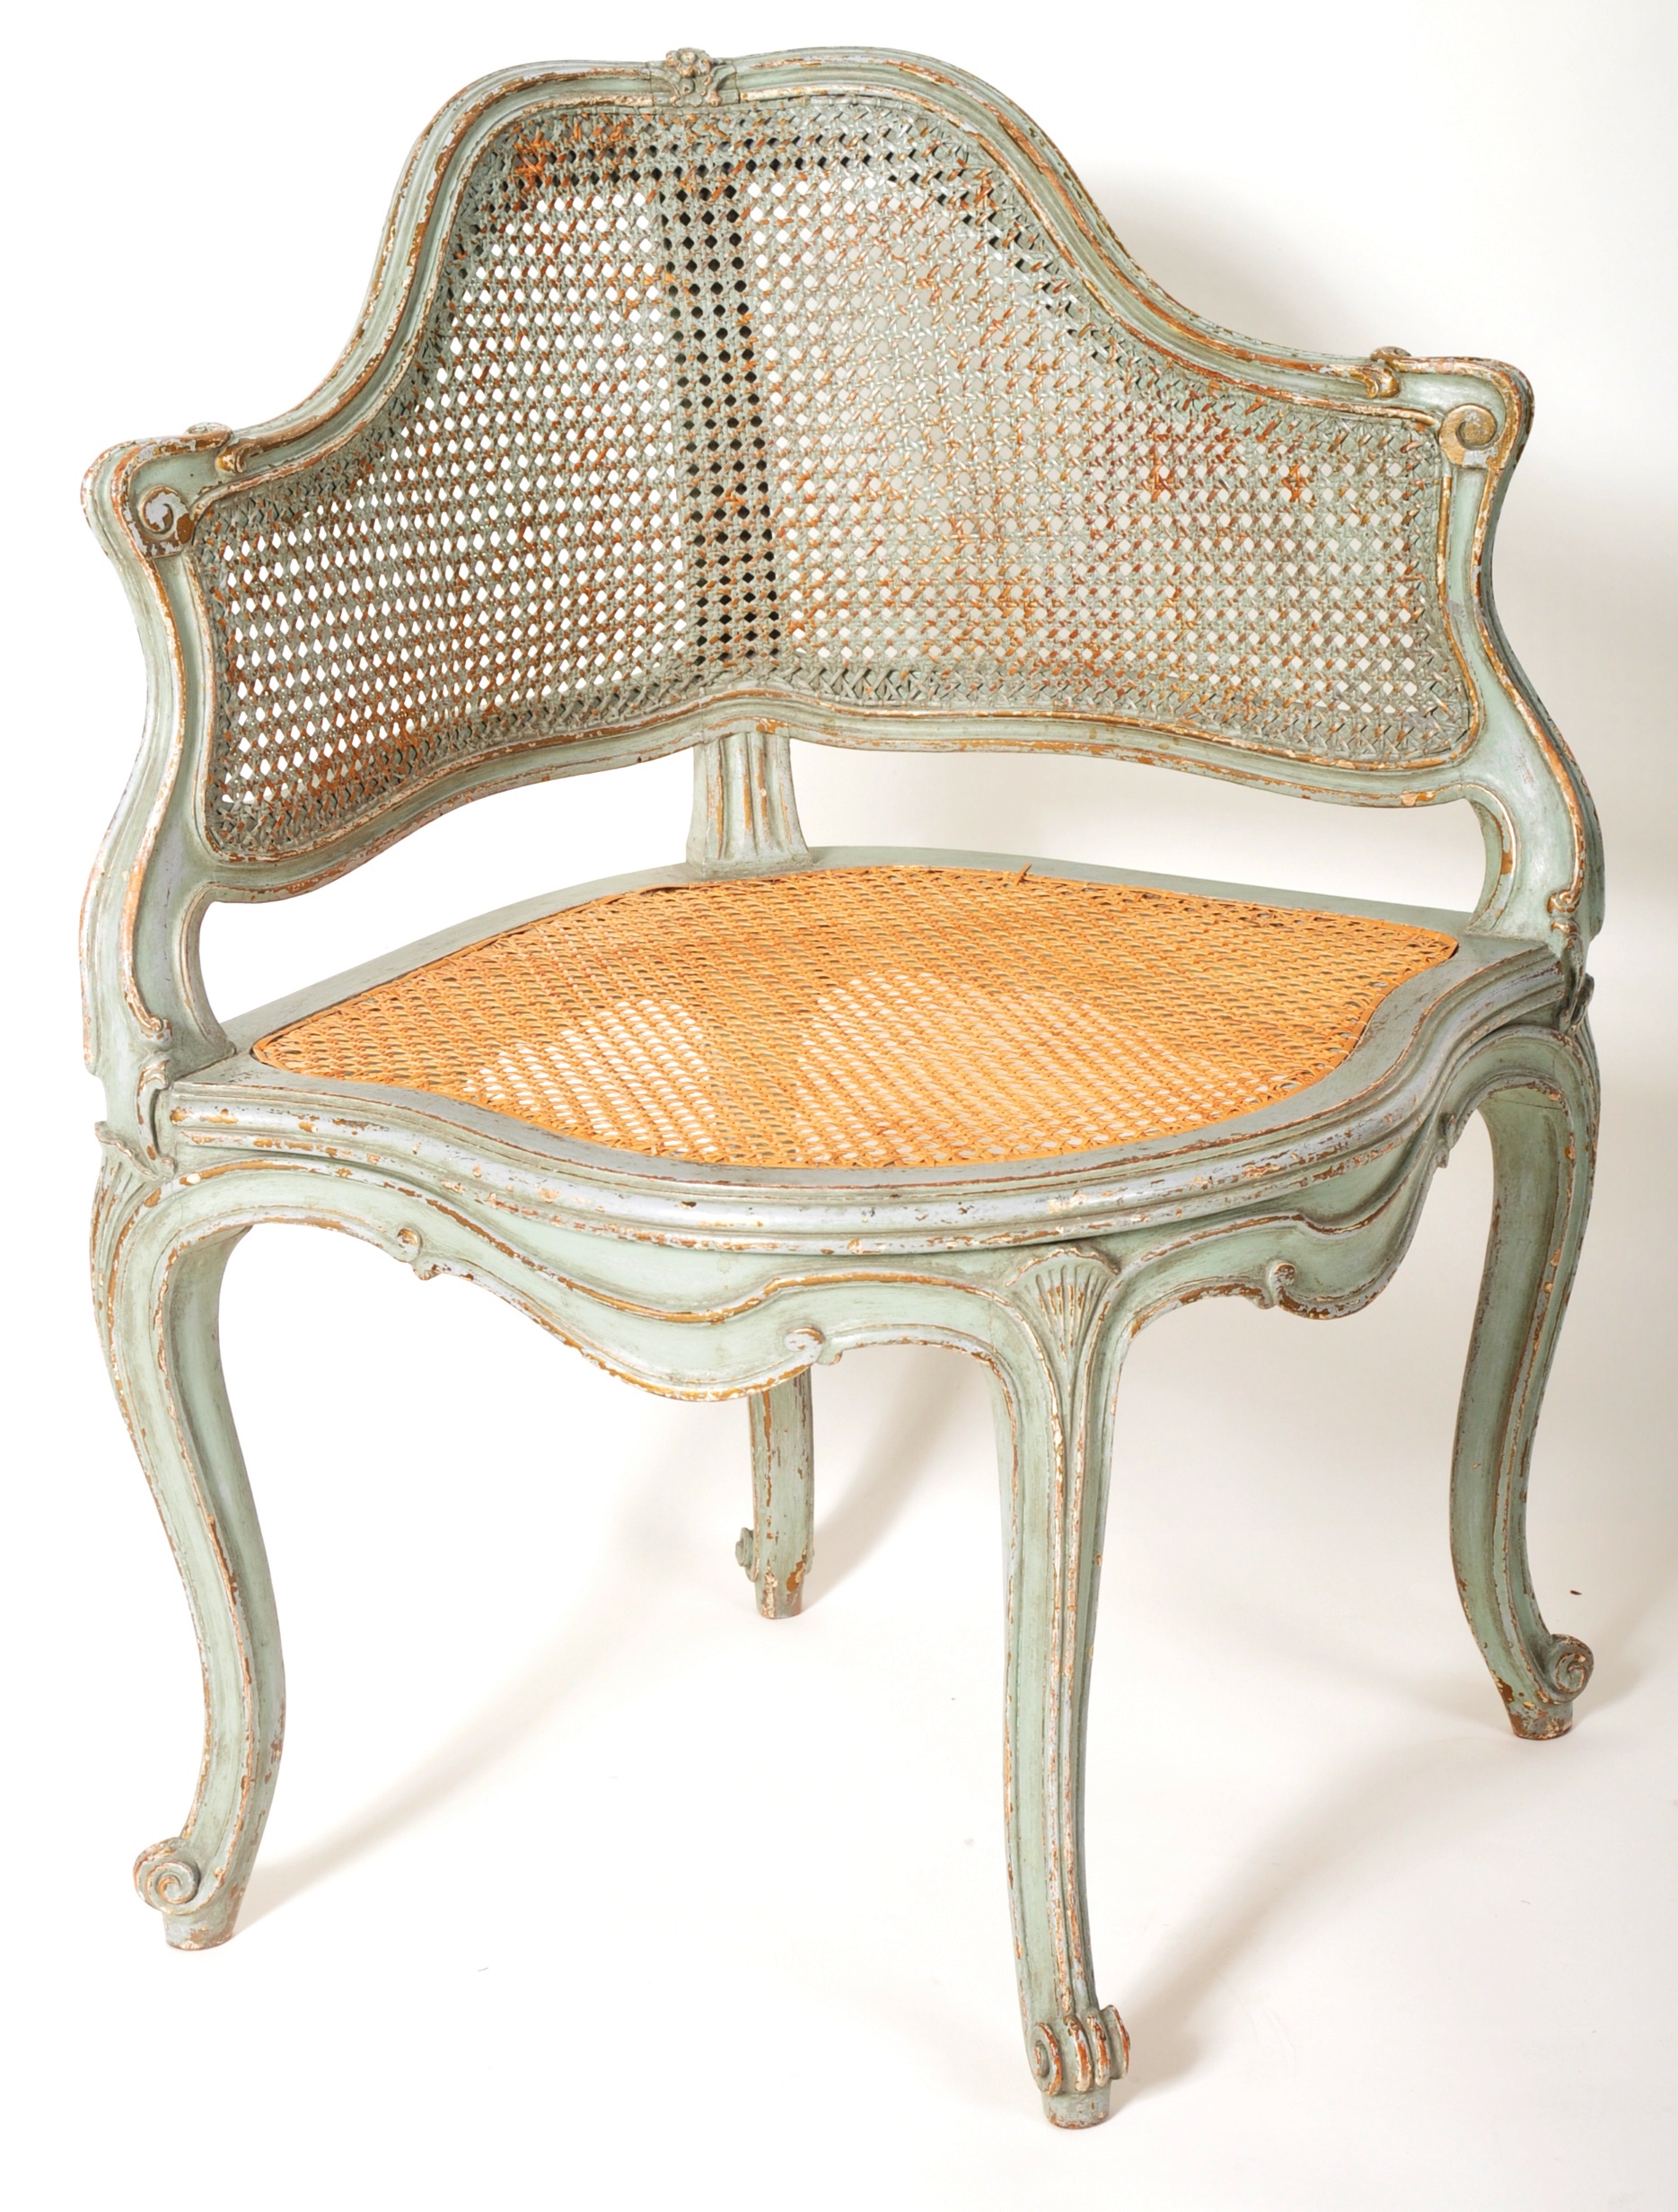 19TH CENTURY FRENCH BERGERE CORNER CHAIR - Image 8 of 13